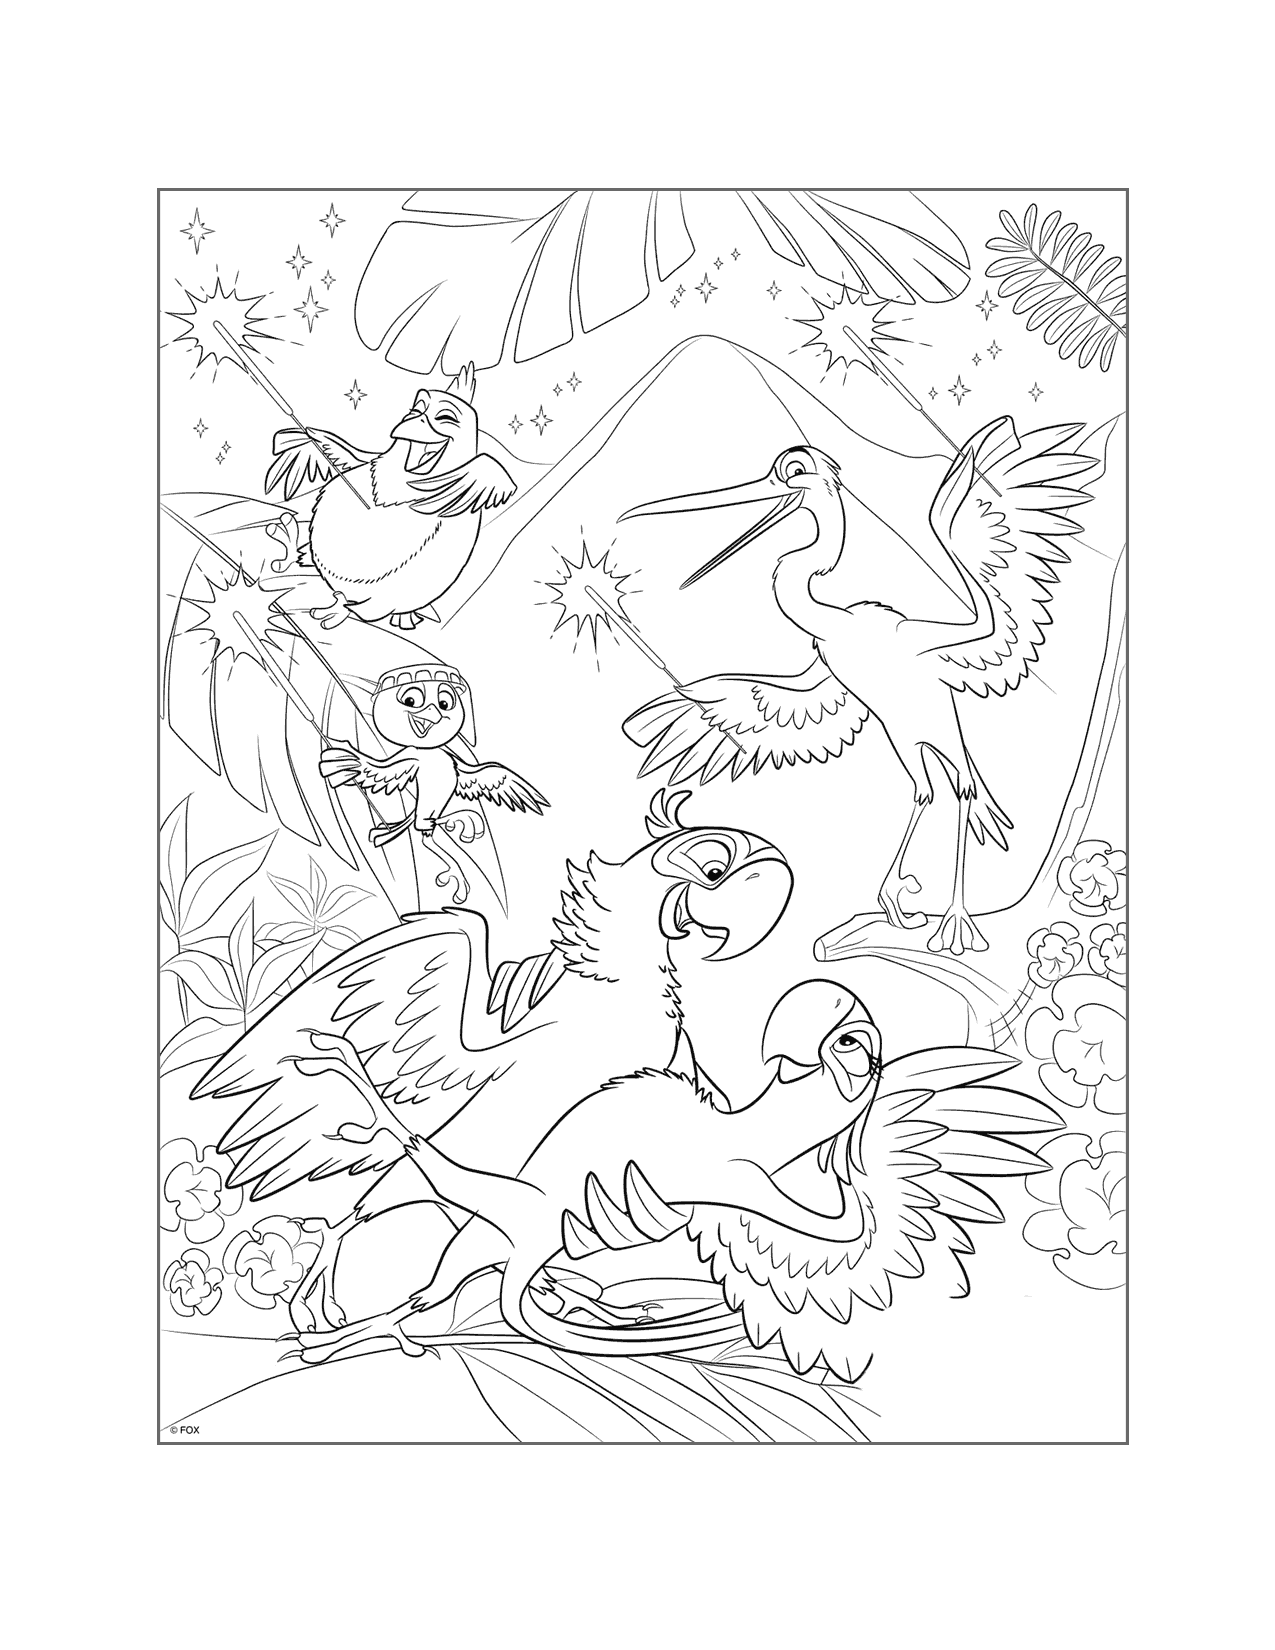 Rio Characters Coloring Page